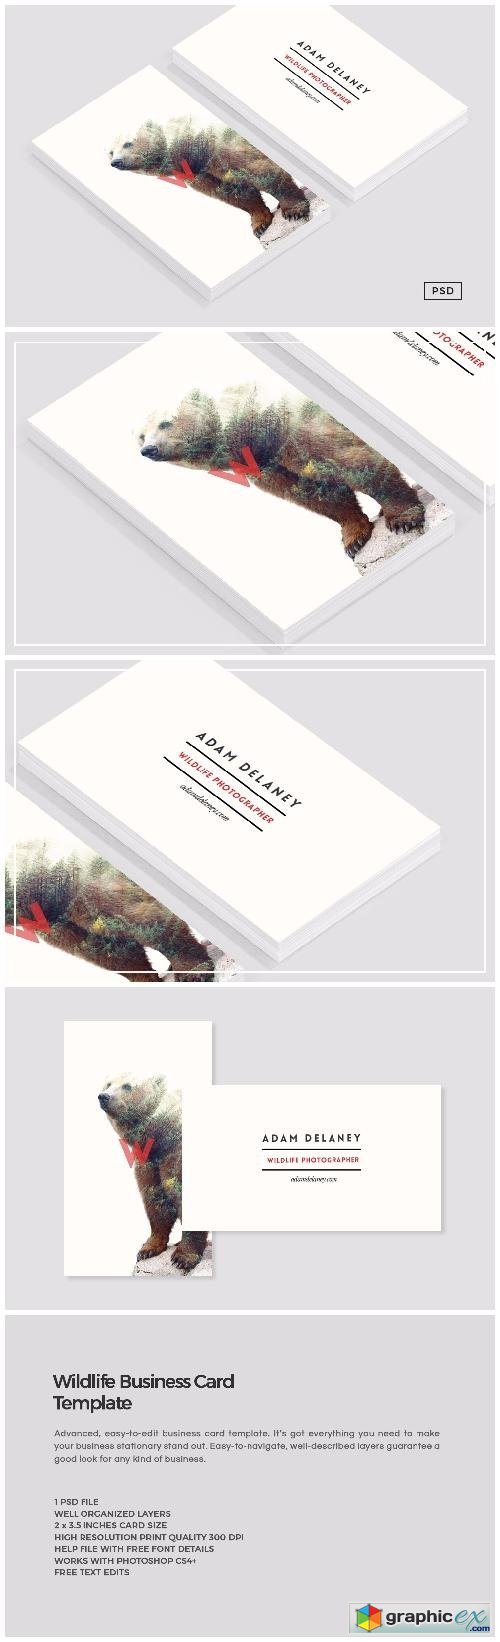 Wildlife Business Card Template